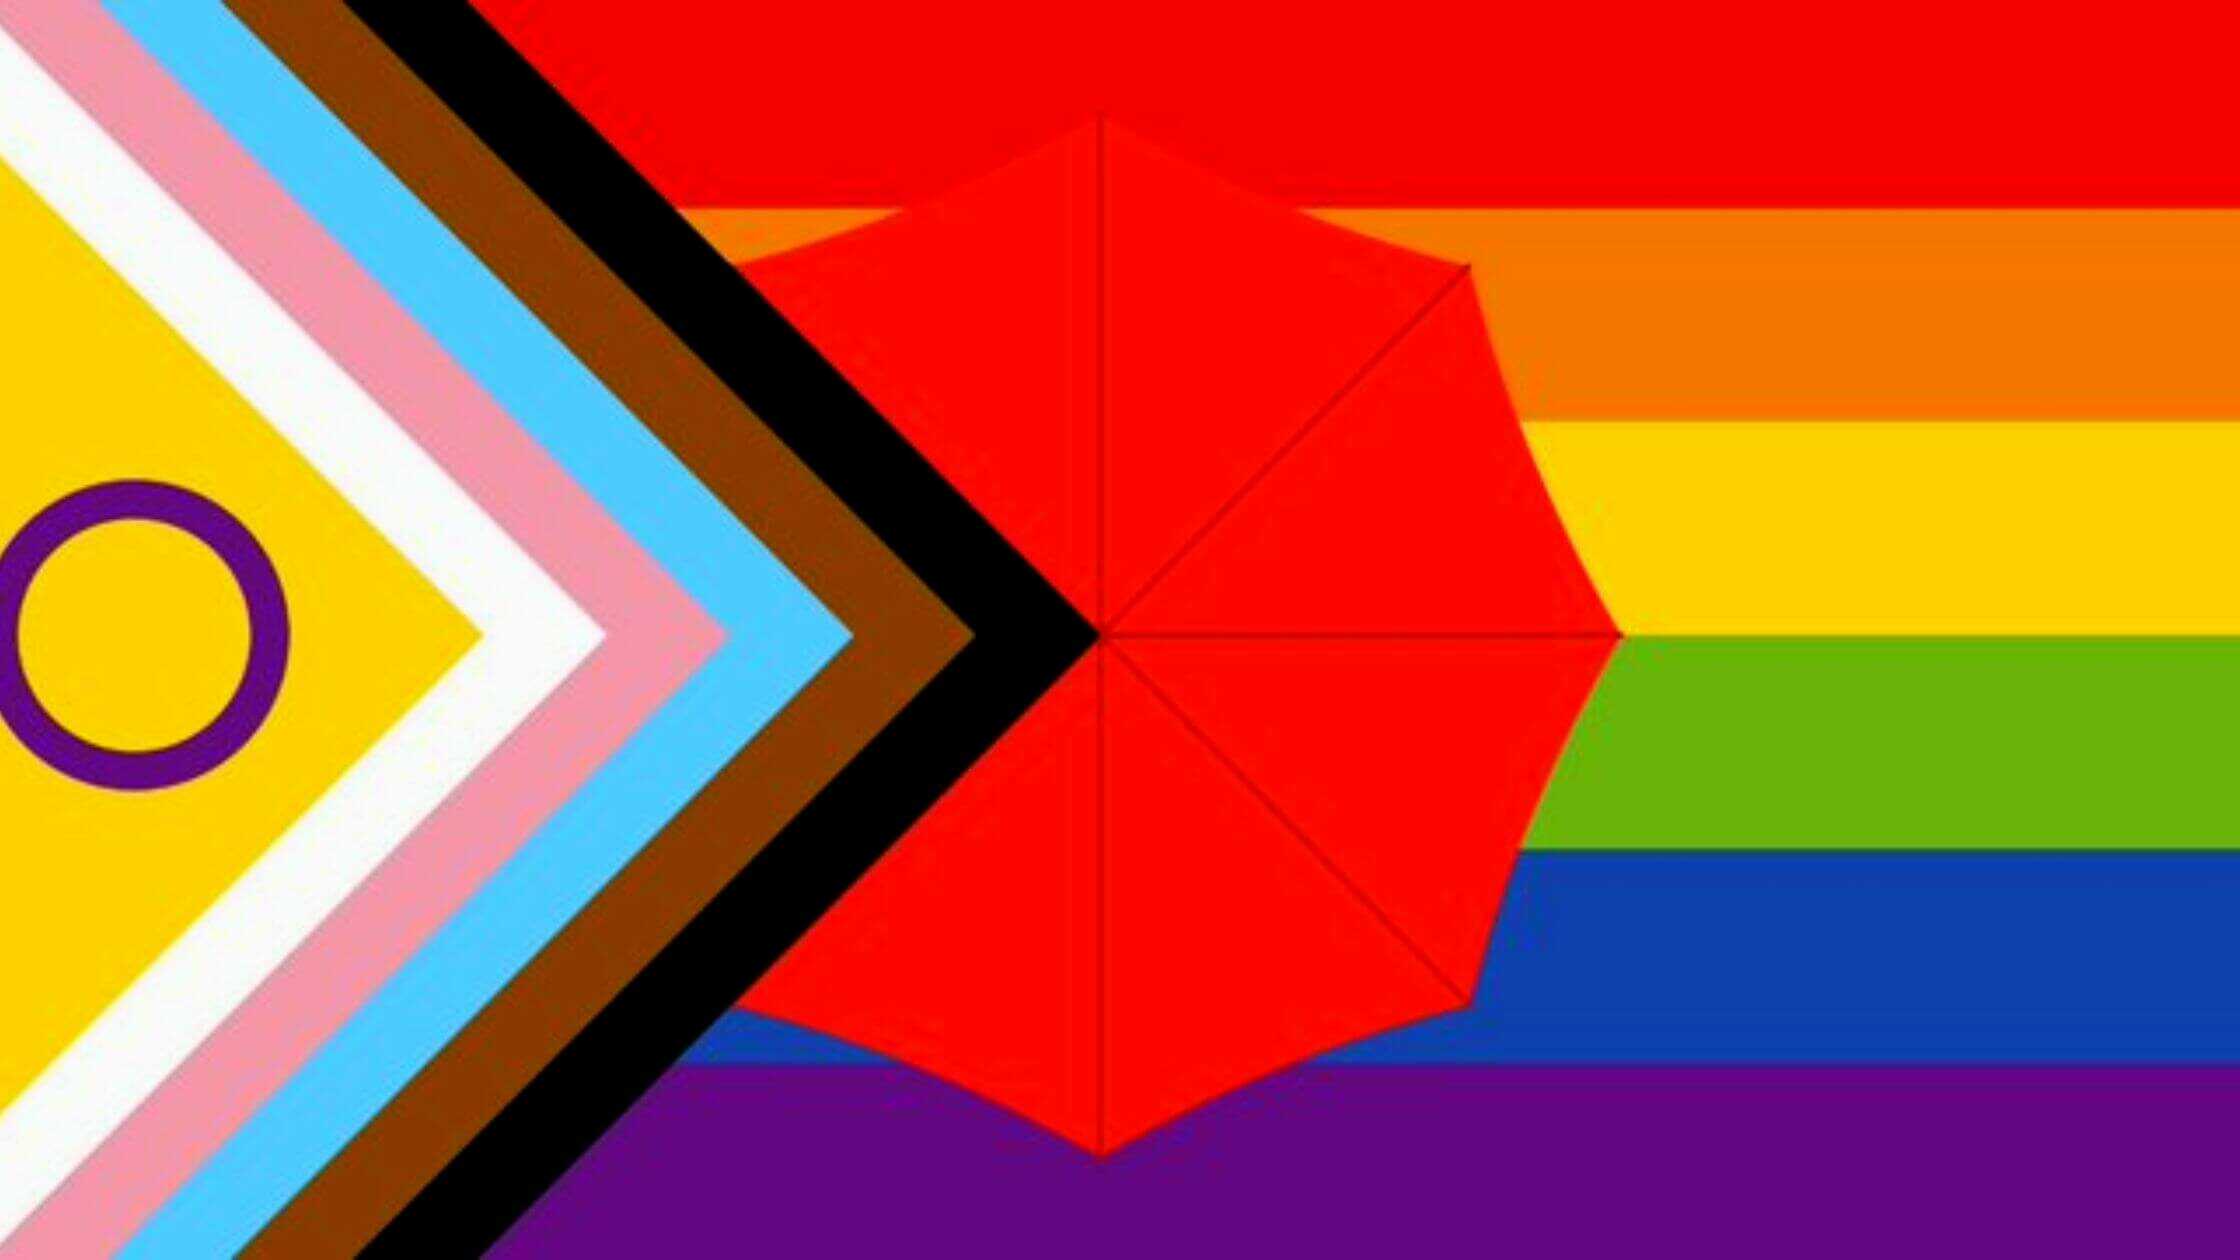 Conservatives Are Enraged By A Pride Flag Concept That No One Wants Or Uses